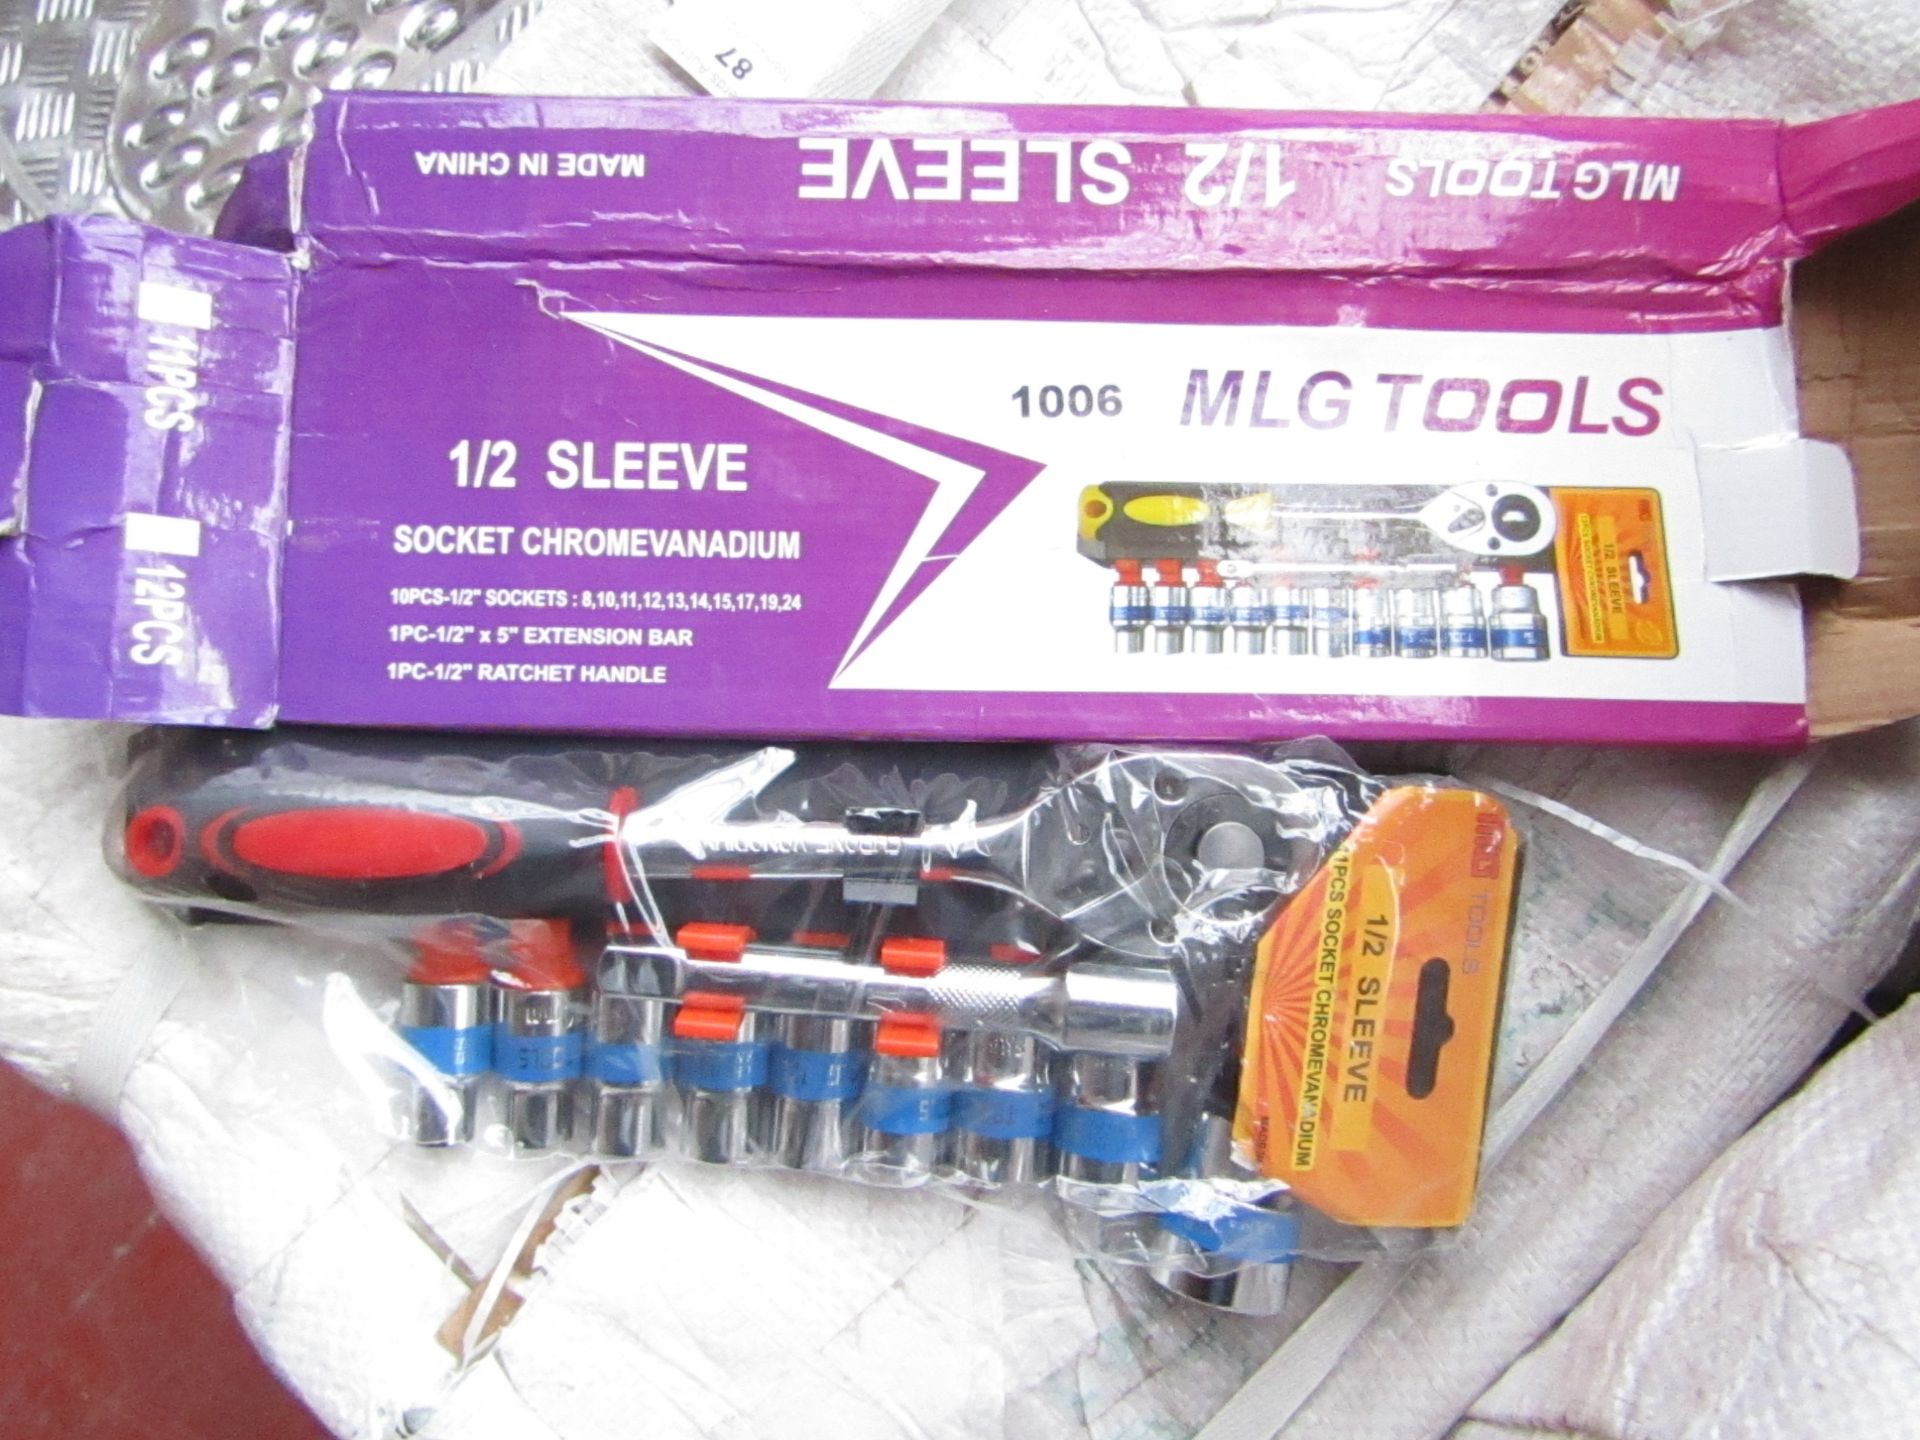 MLG Tools 12 piece socket set, new in carry case.